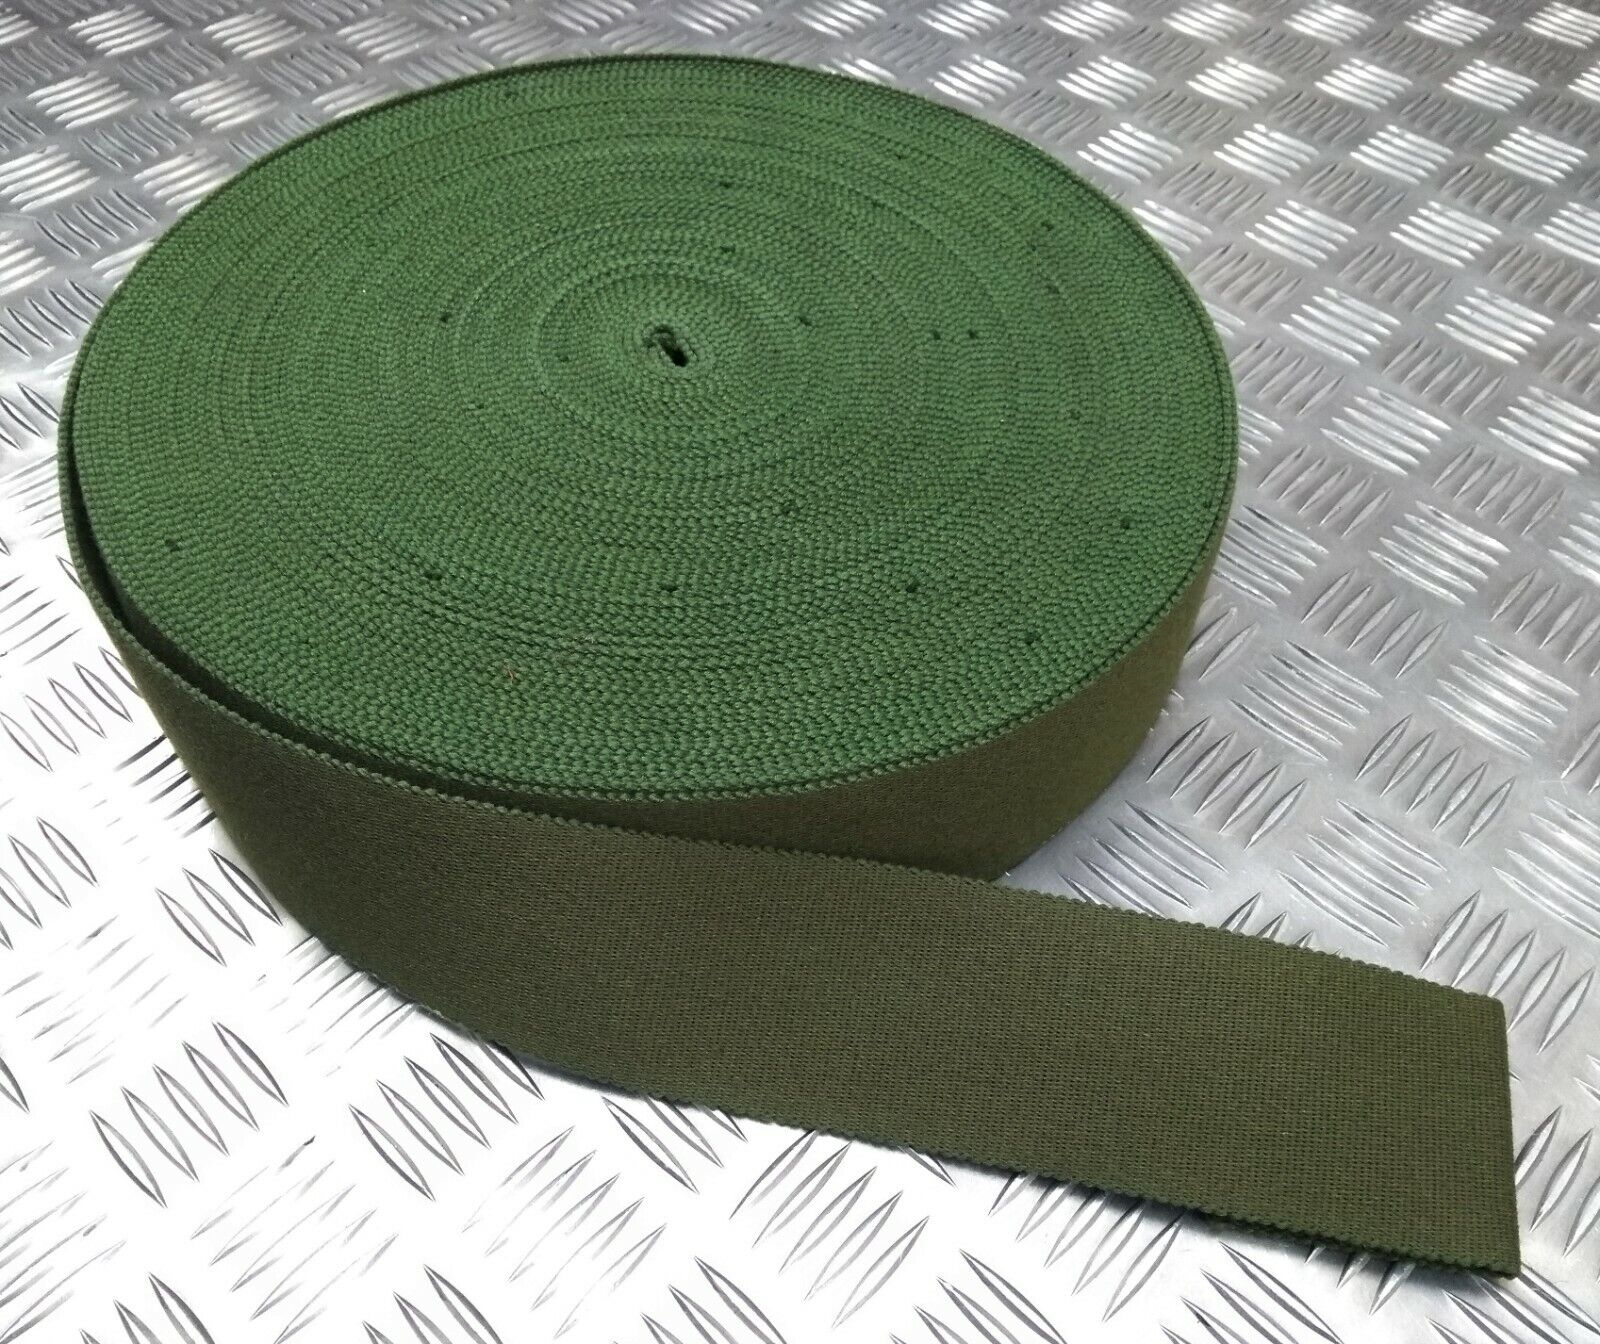 Genuine Denmark Army Issue Green Cotton Canvas Stable Belt Material BRAND NEW